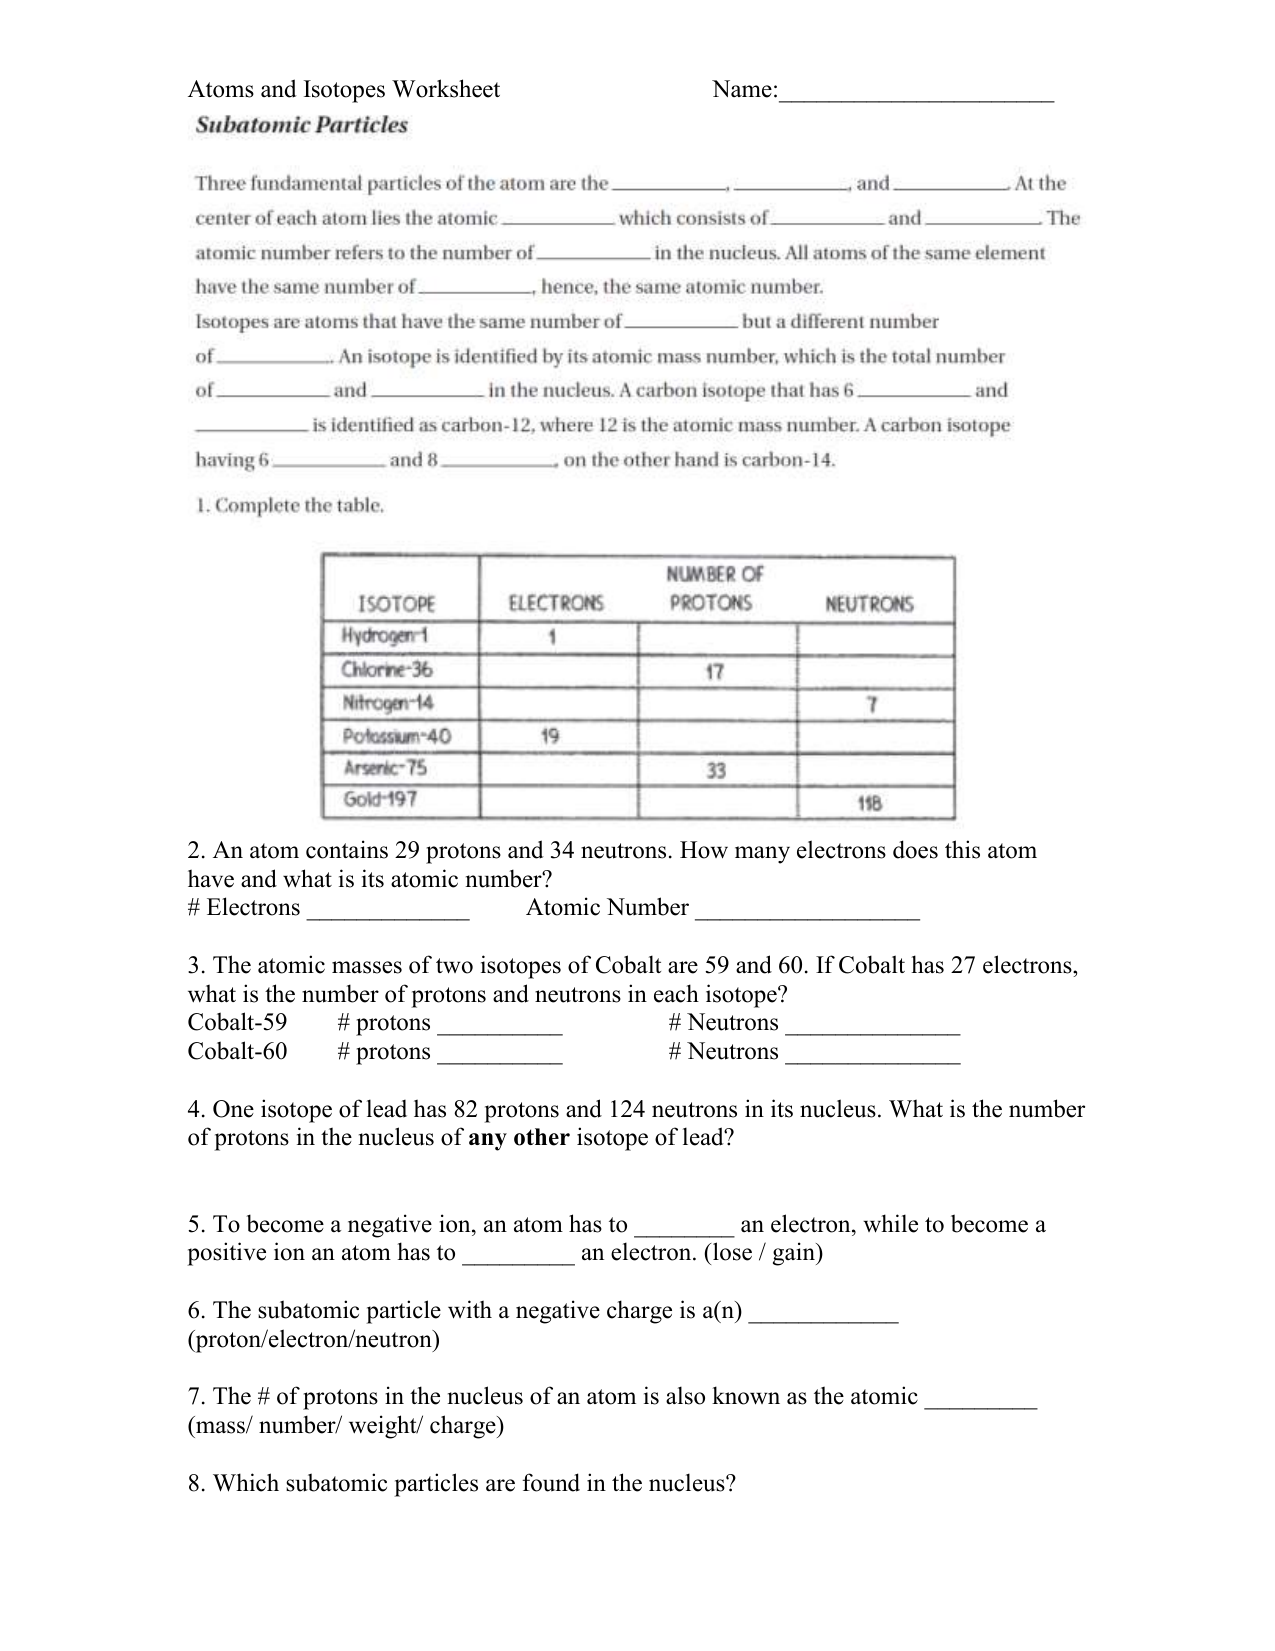 Atoms and Isotopes Worksheet Pertaining To Atoms And Isotopes Worksheet